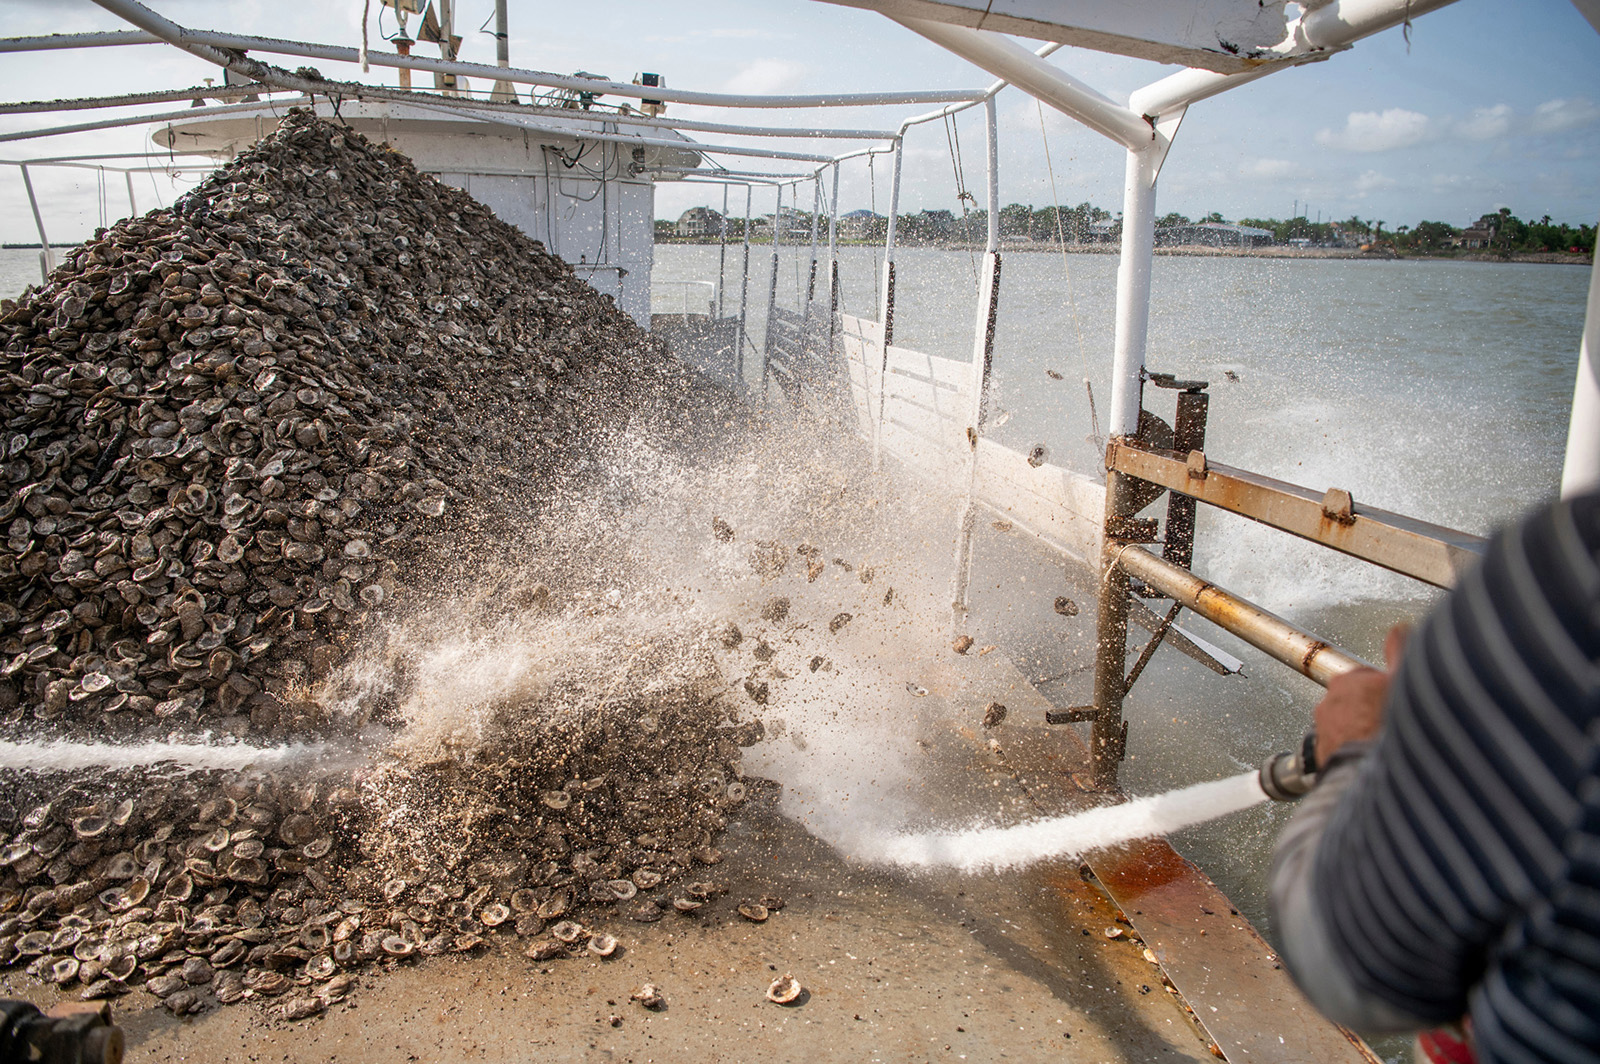 Oyster harvesters and ecologists partner to rehabilitate a popular reef in Galveston Bay